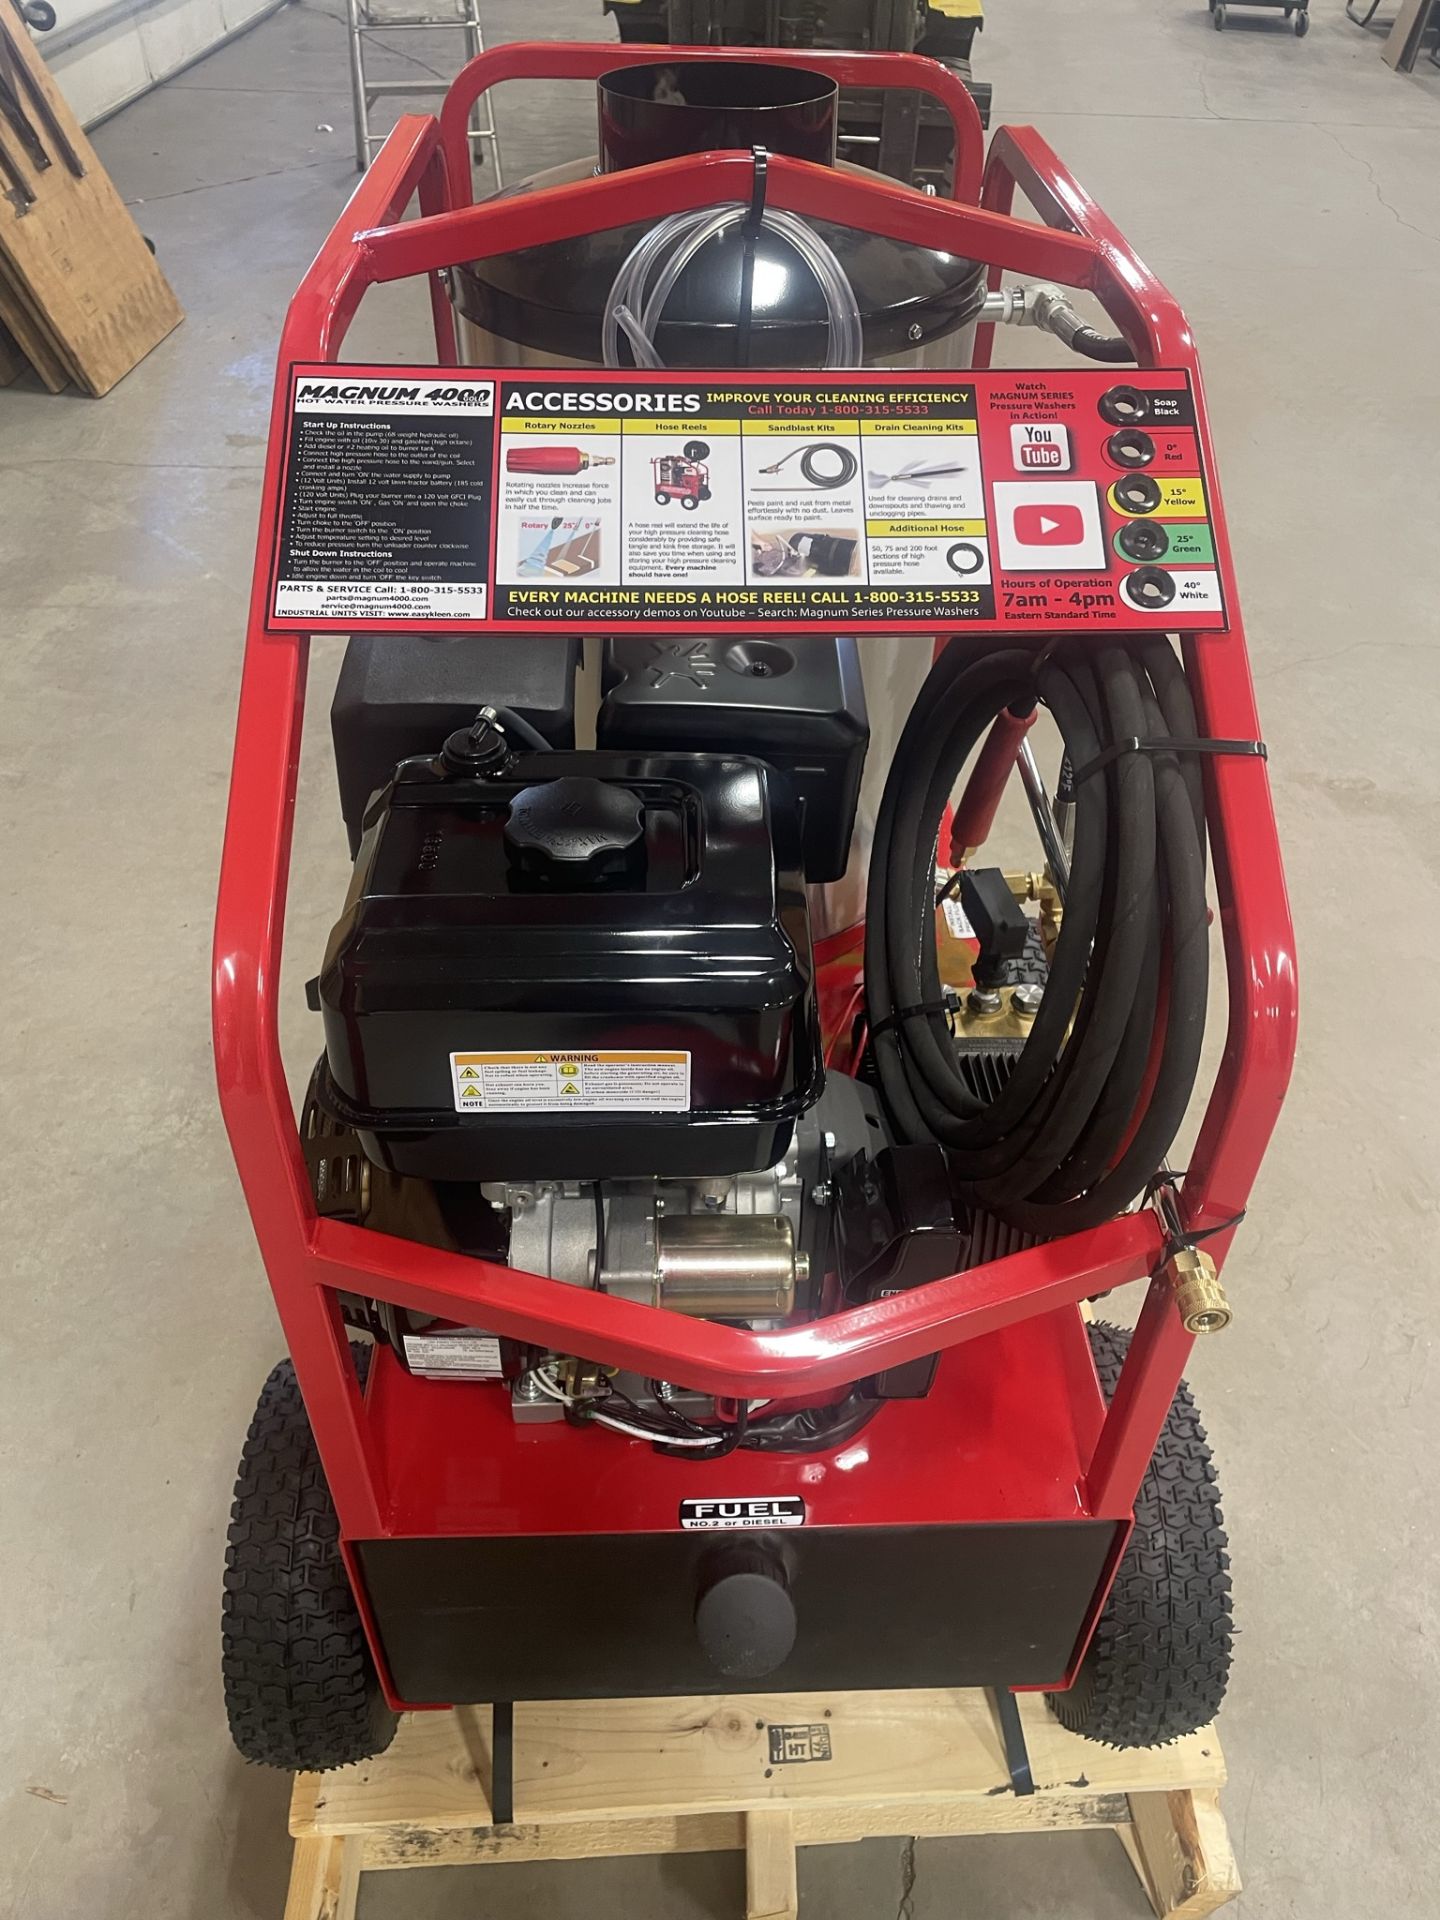 2023 UNUSED EASY KLEEN MAGNUM GOLD4000 HOT WATER PRESSURE WASHER - CANADIAN MADE (NO OIL OR BATTERY) - Image 5 of 9